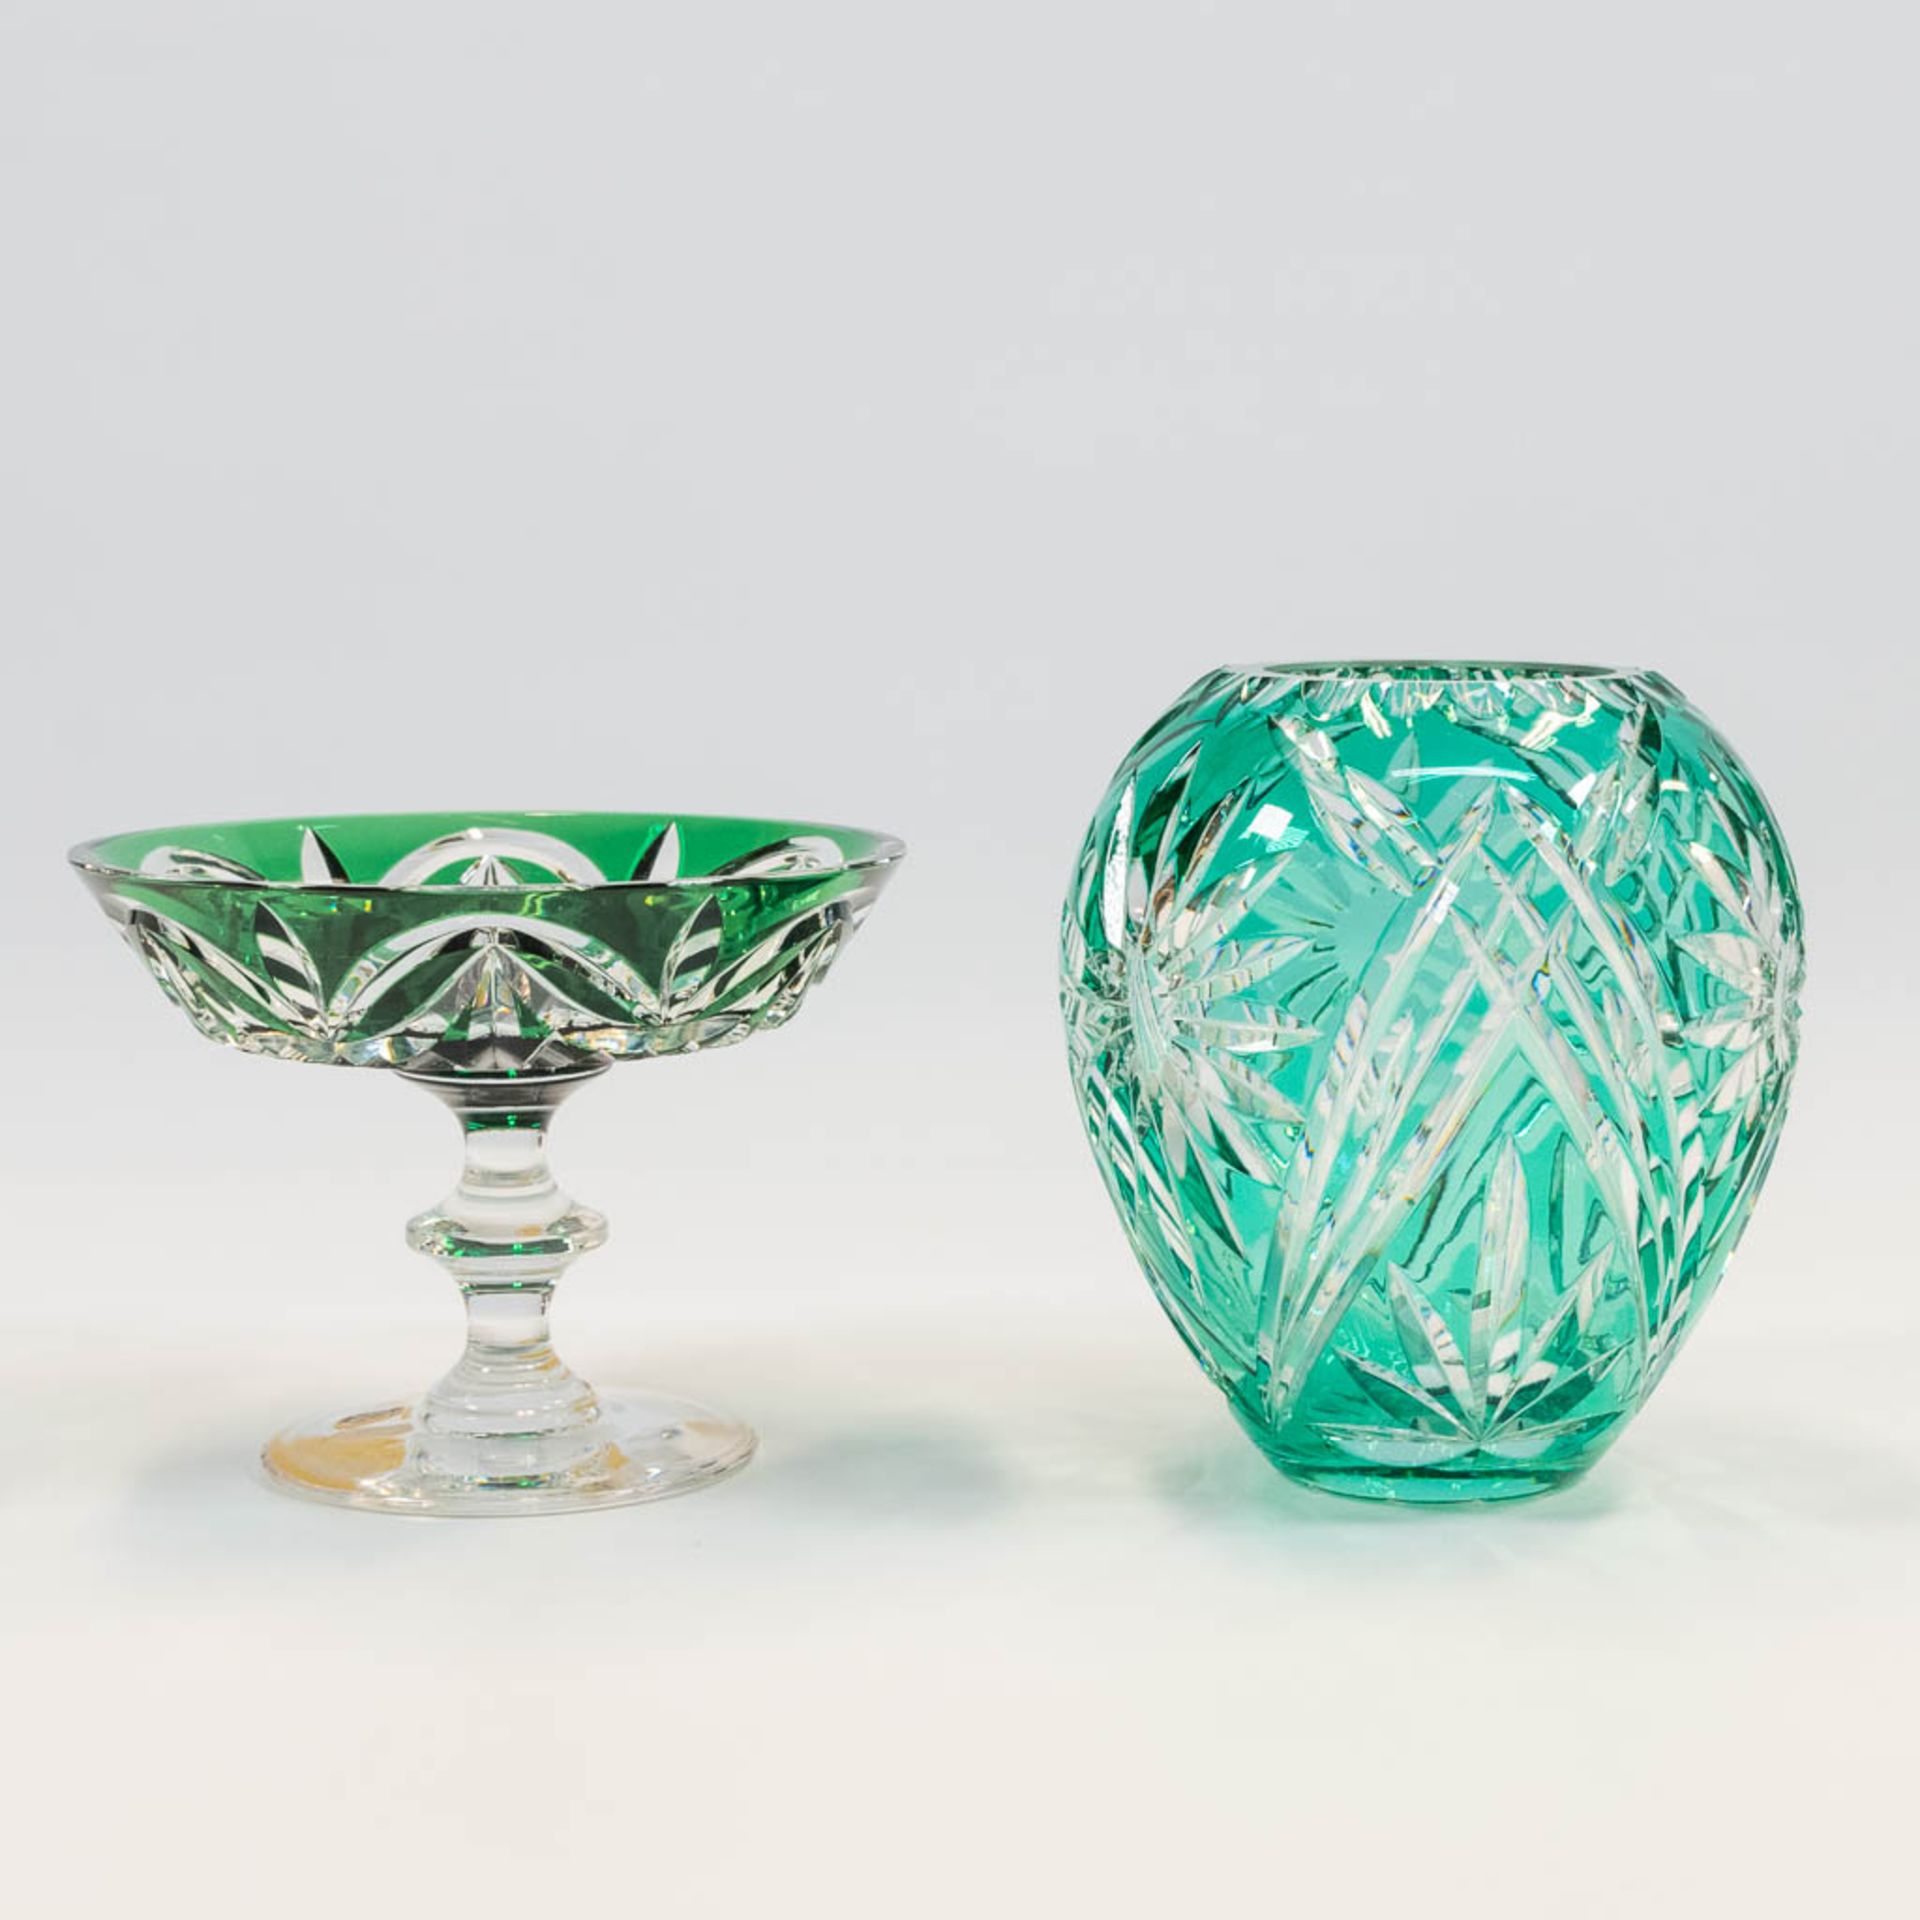 A collection of a Tazza and a flower vase in cut crystal 1 made by Val Saint Lambert and 1 made prob